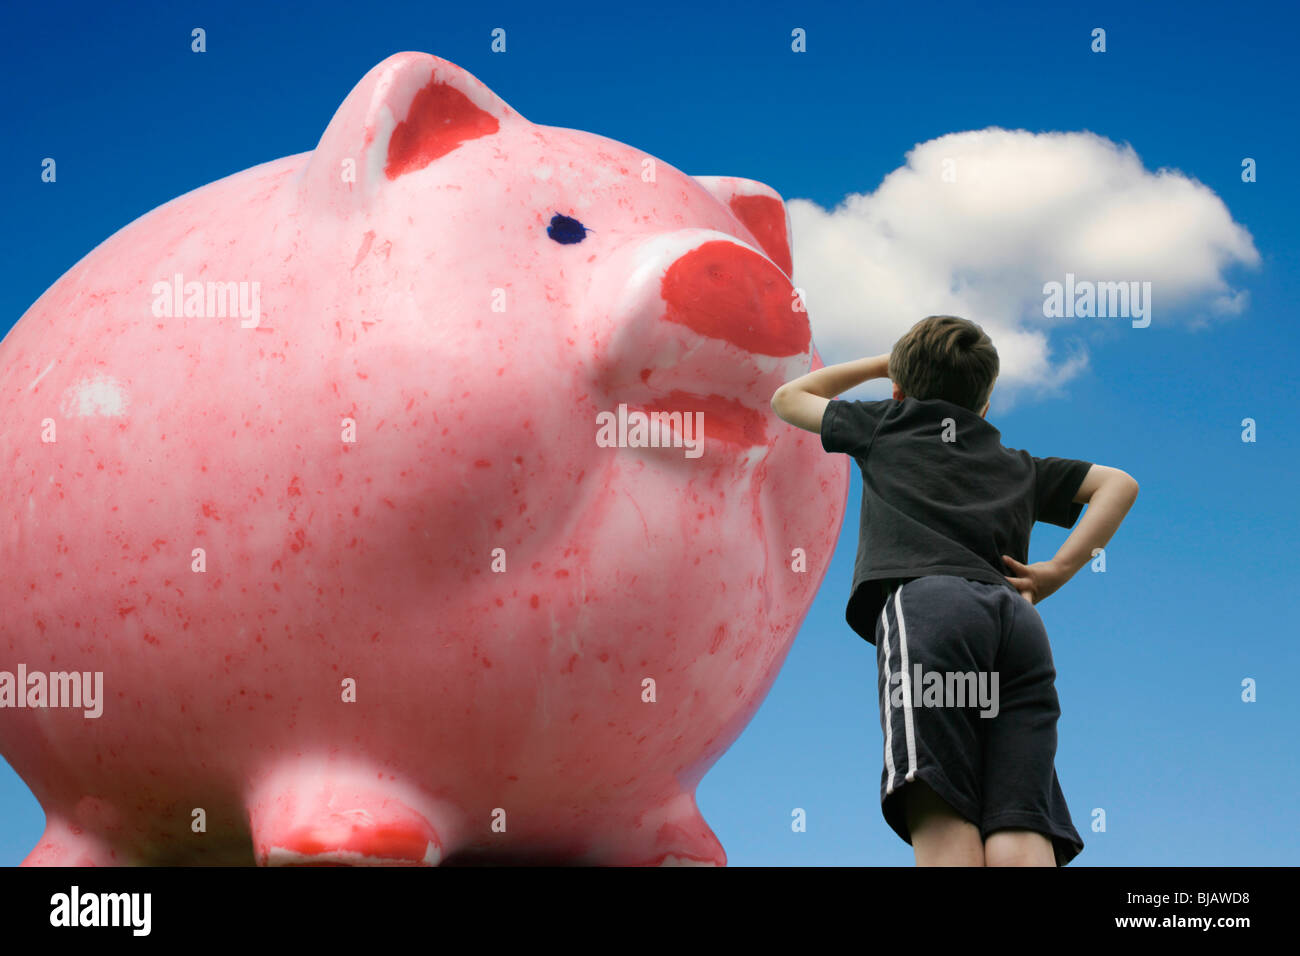 a-boy-looks-up-at-his-giant-grown-piggy-bank-BJAWD8.jpg